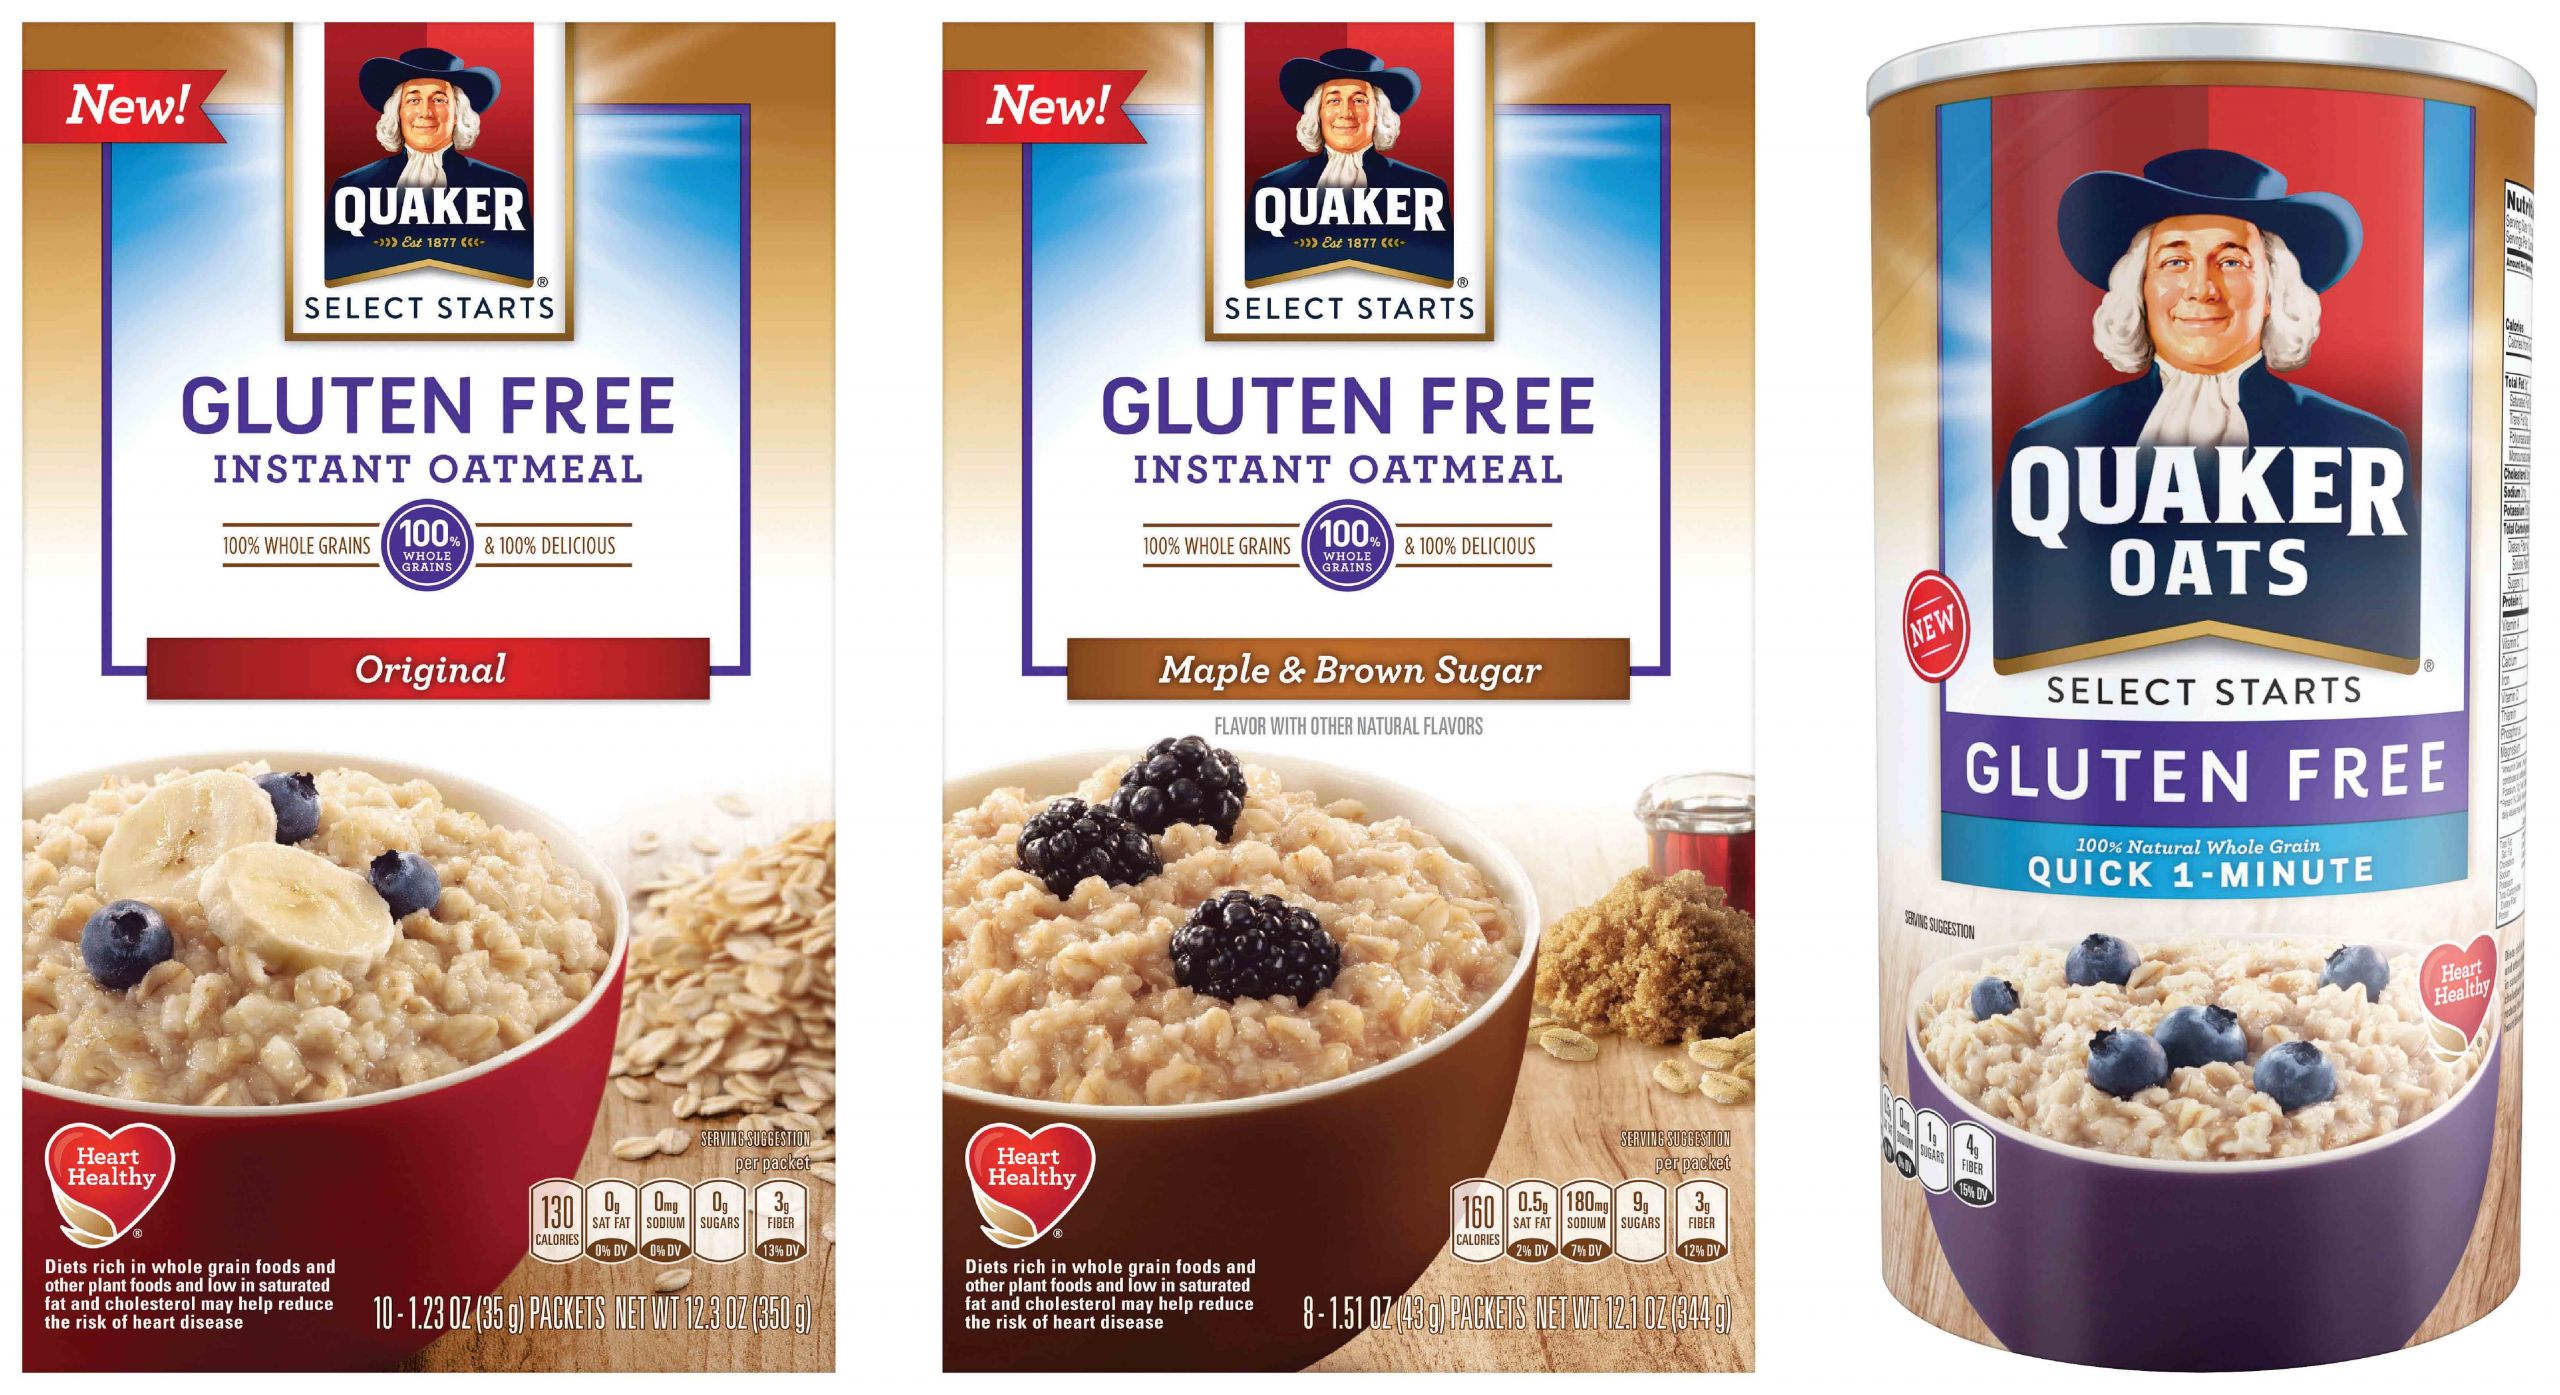 Gluten Free Quaker Oats
 Quaker Oats Gluten Free Oatmeal Launches Nationwide in